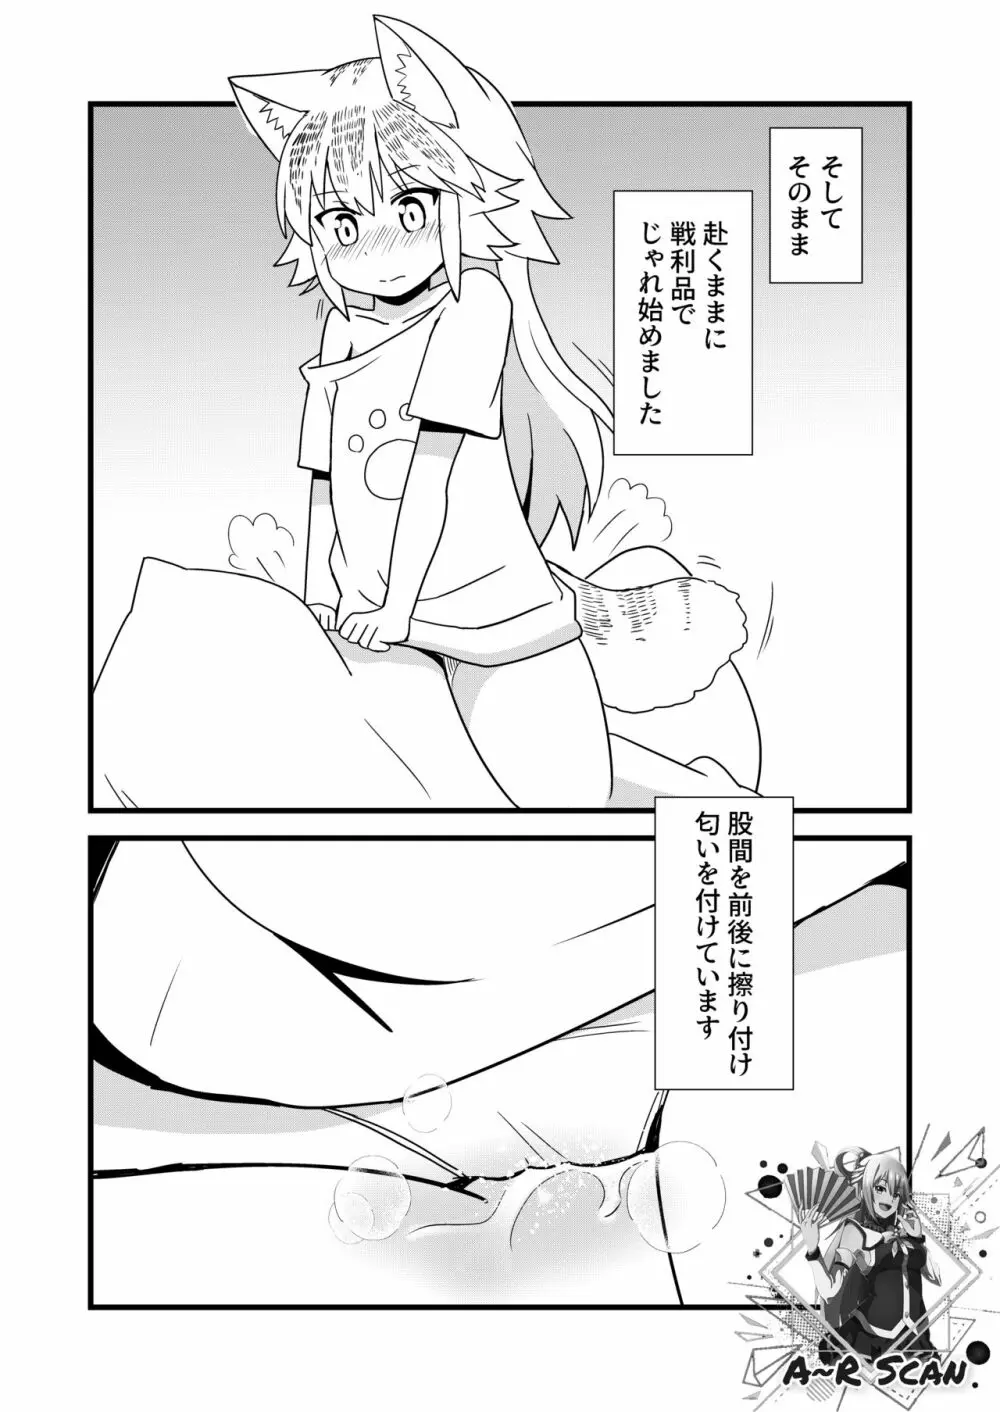 んばっばんばんばんばんばんばっば! - page9